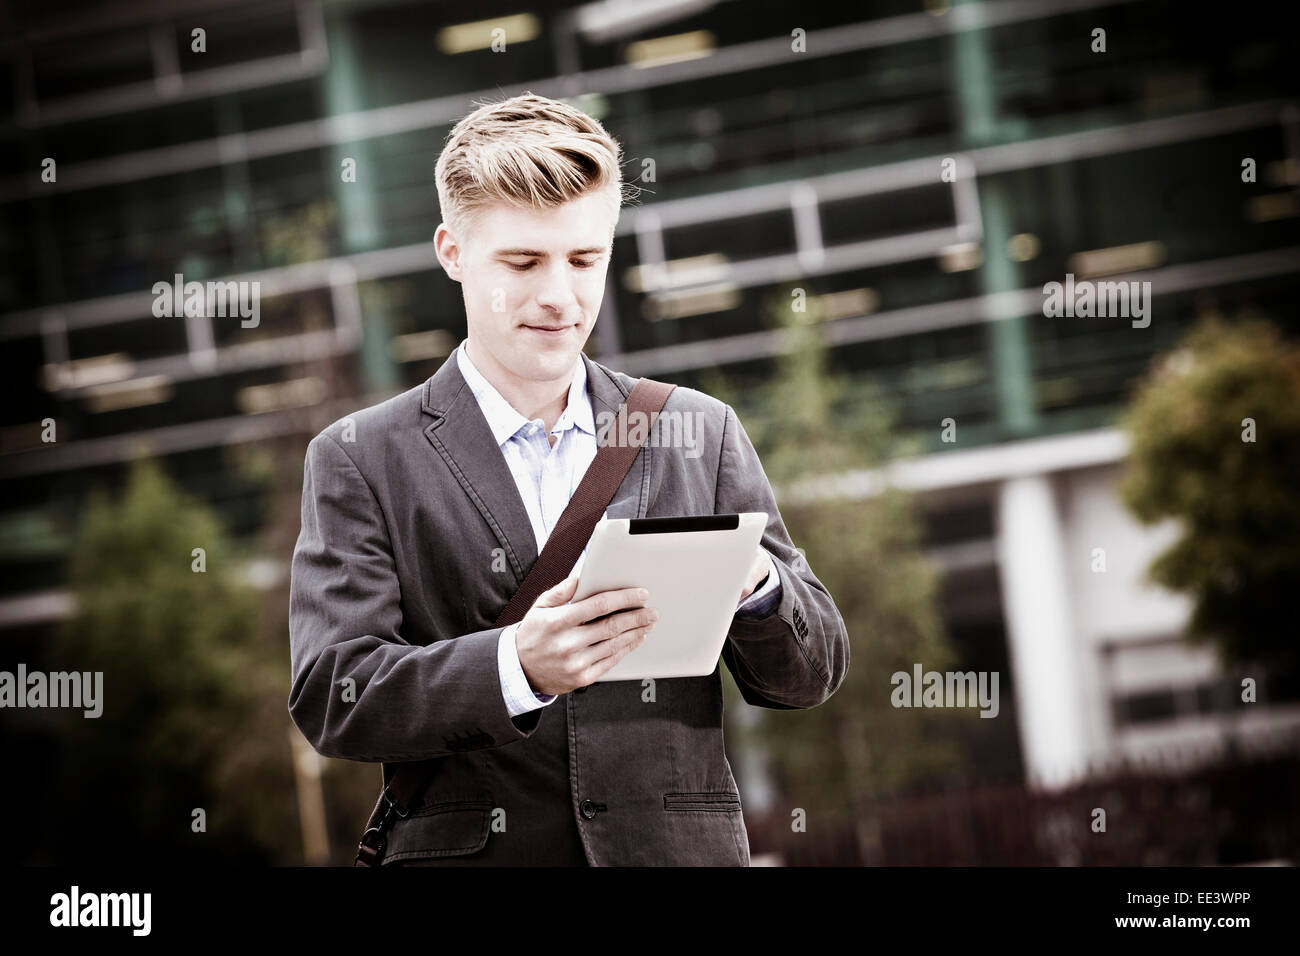 Young businessman using digital tablet outdoors, Munich, Bavaria, Germany Stock Photo